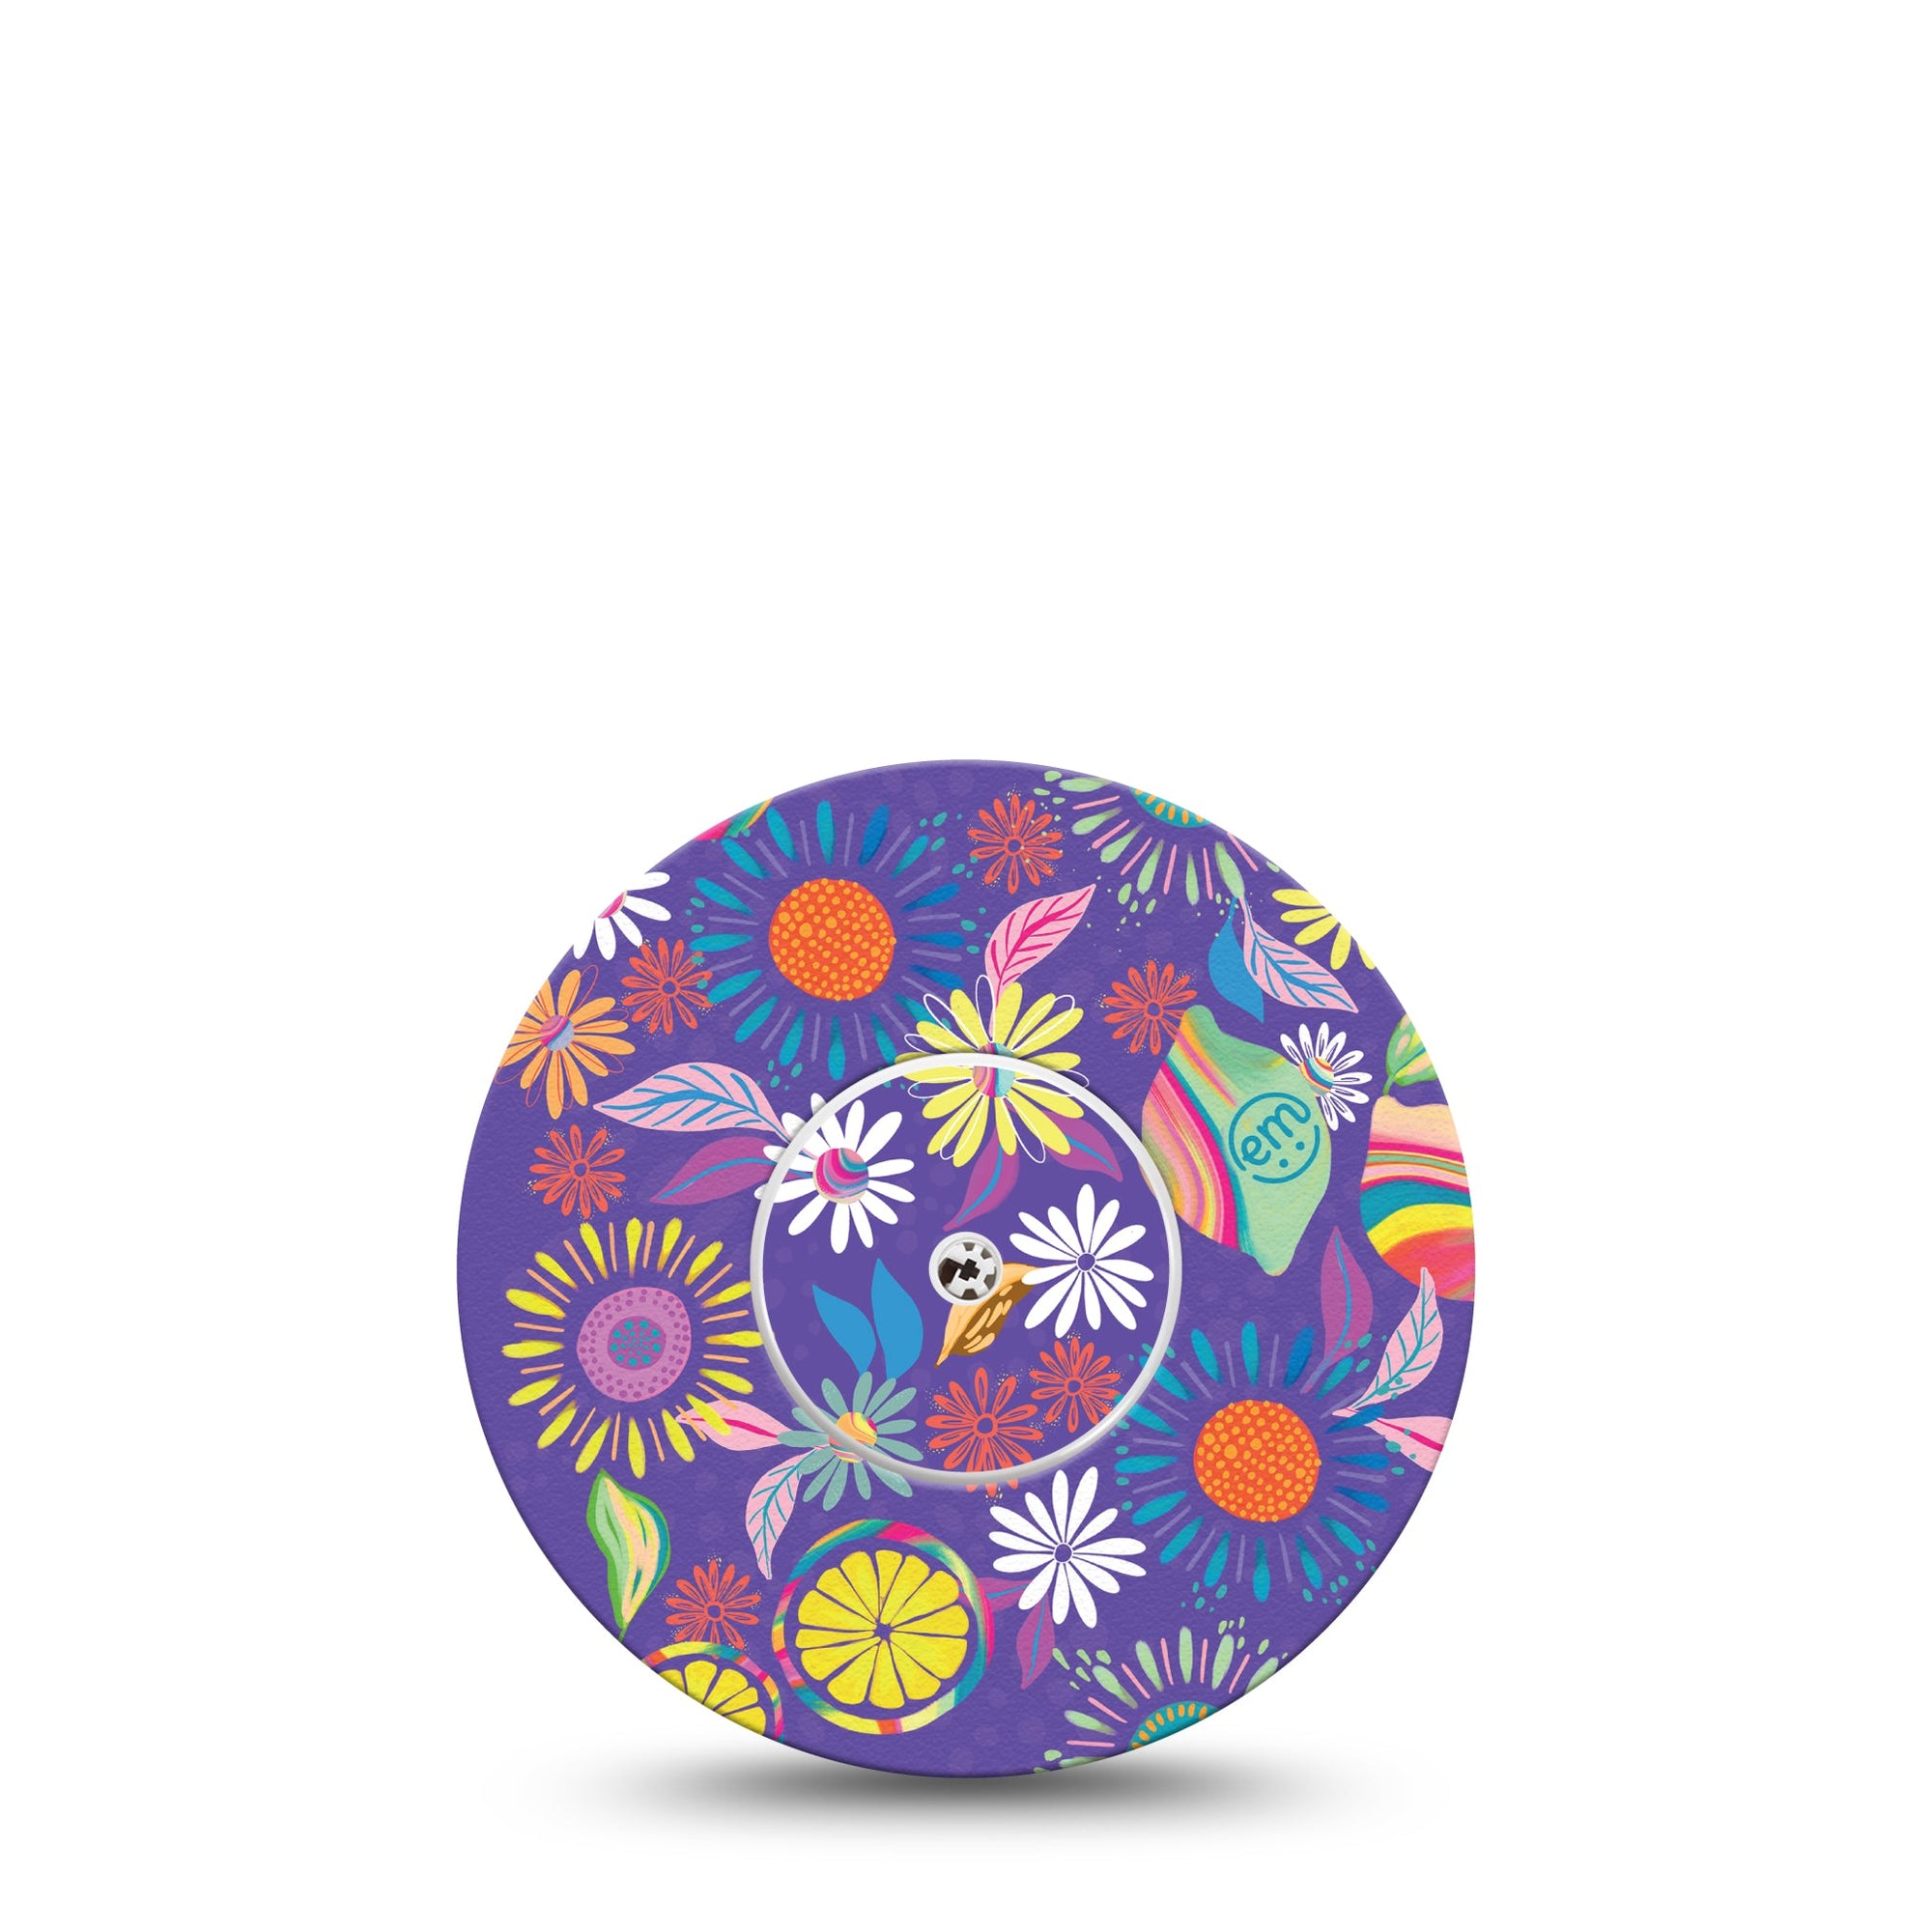 ExpressionMed Purple Flowers Freestyle Libre Sticker and Tape Colorful Abstract by Etta Vee Adhesive STticker and Tape Design Continuous Glucose Monitor Design, Abbott Lingo